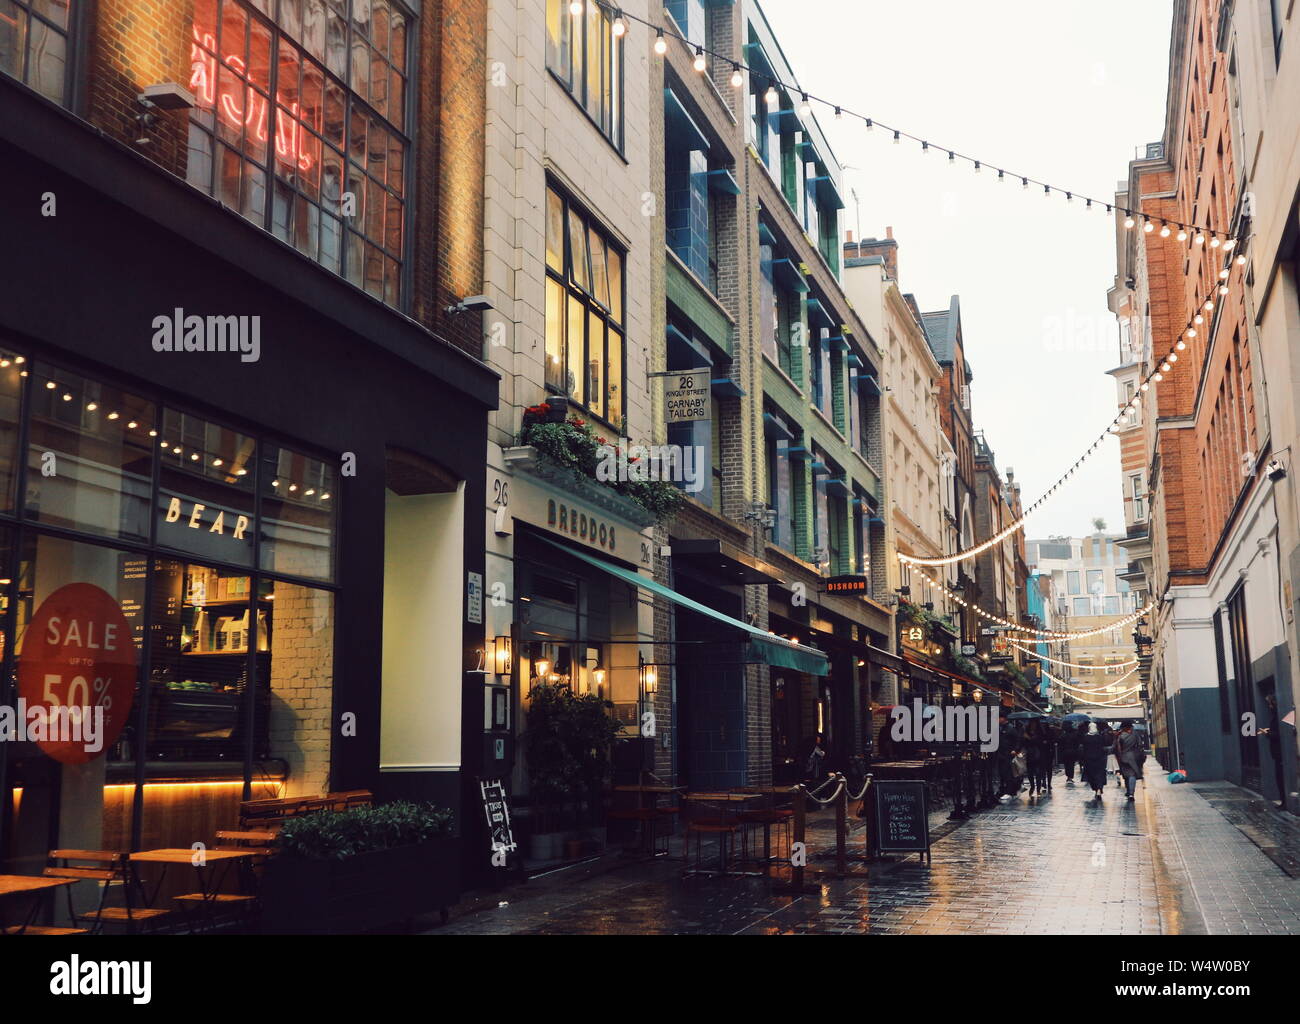 People shopping under the string lights on a rainy day on Kingly Street in Soho, London, UK. Stock Photo